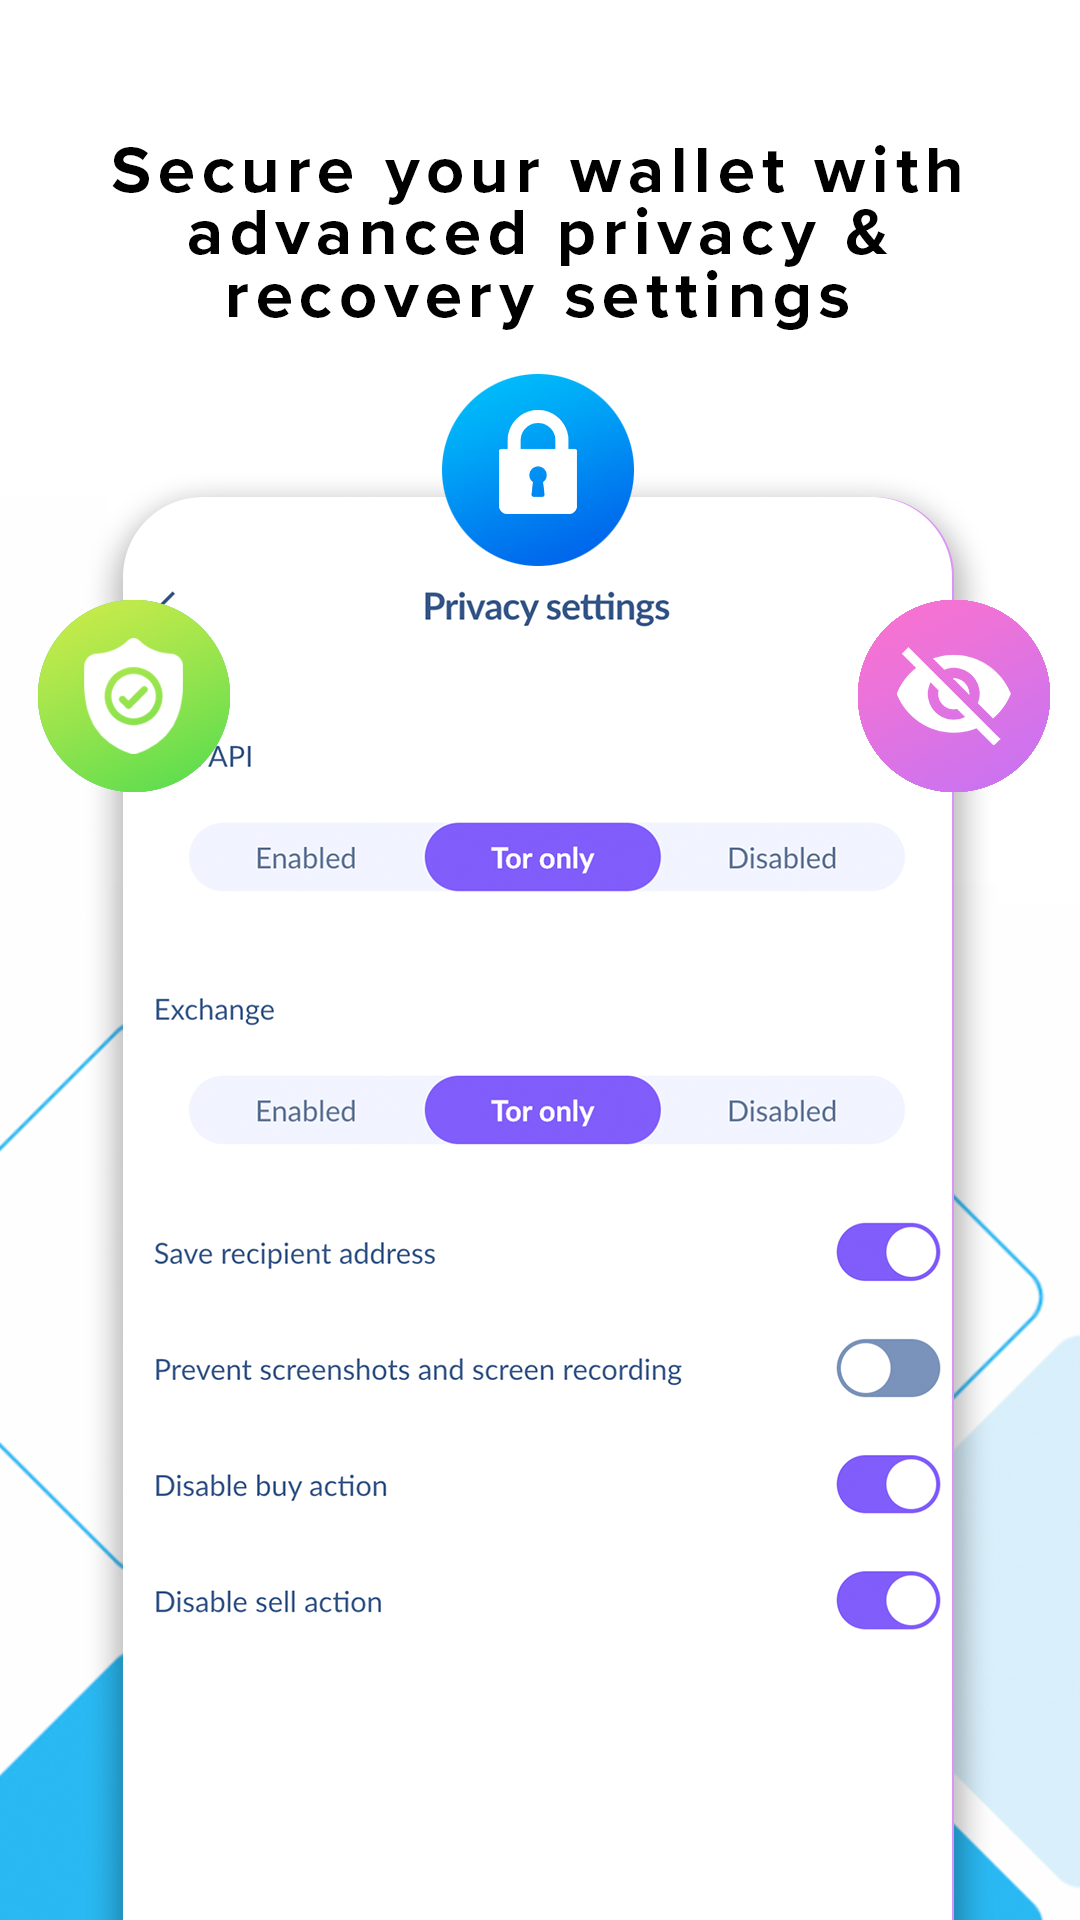 Secure your wallet with advanced privacy & security settings